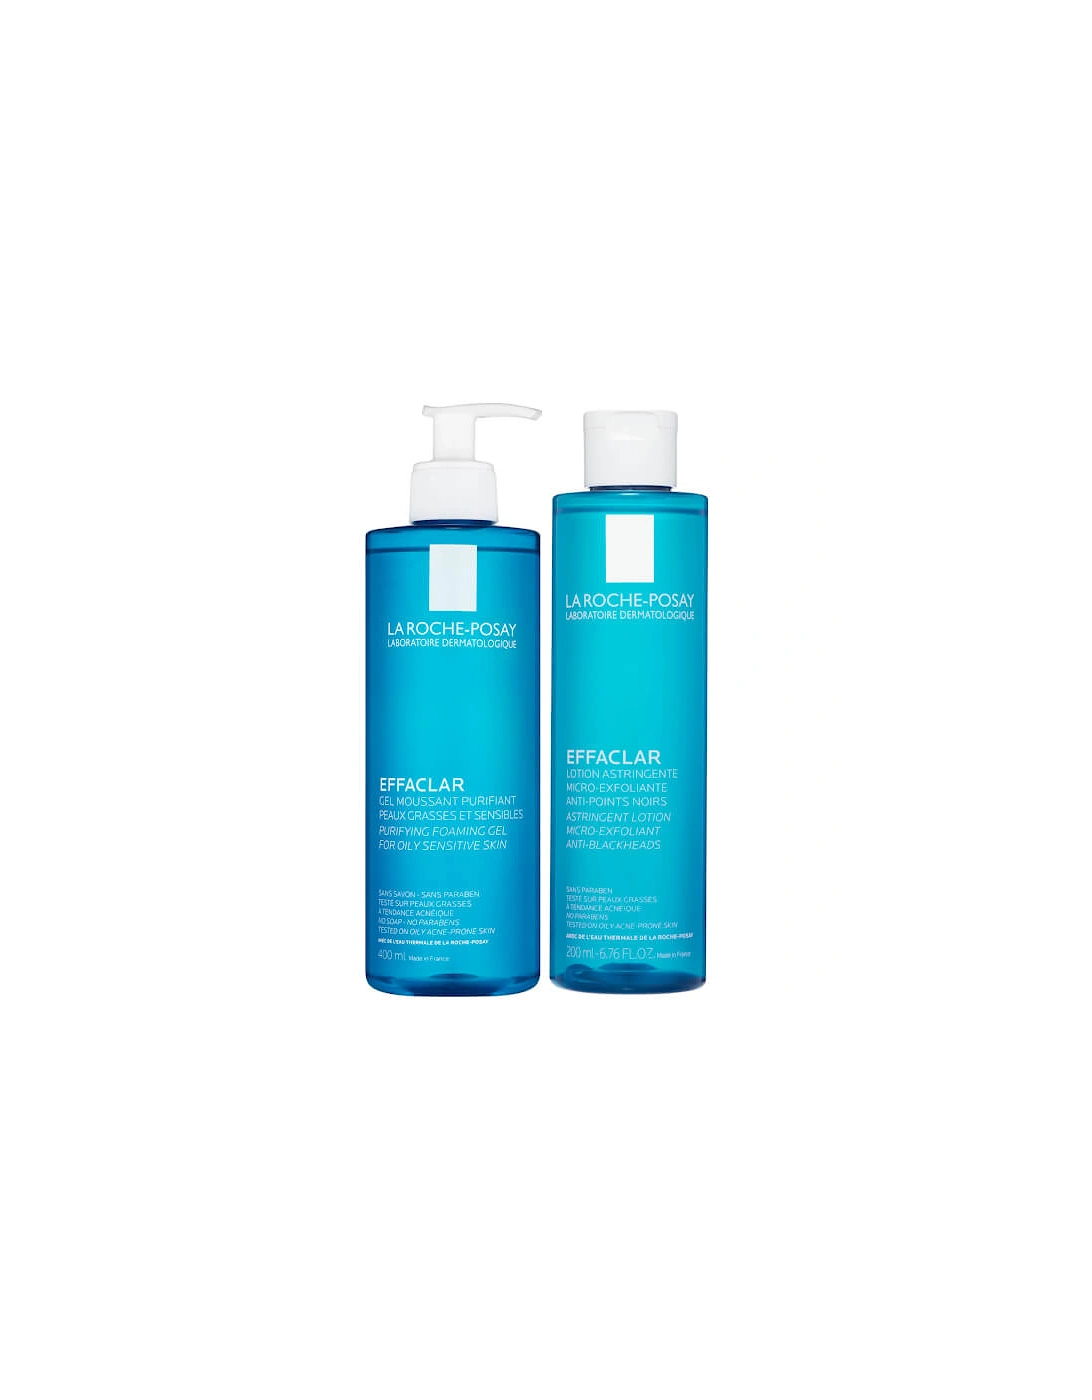 La Roche-Posay Blemish Prone Skin Cleansing Duo, 2 of 1